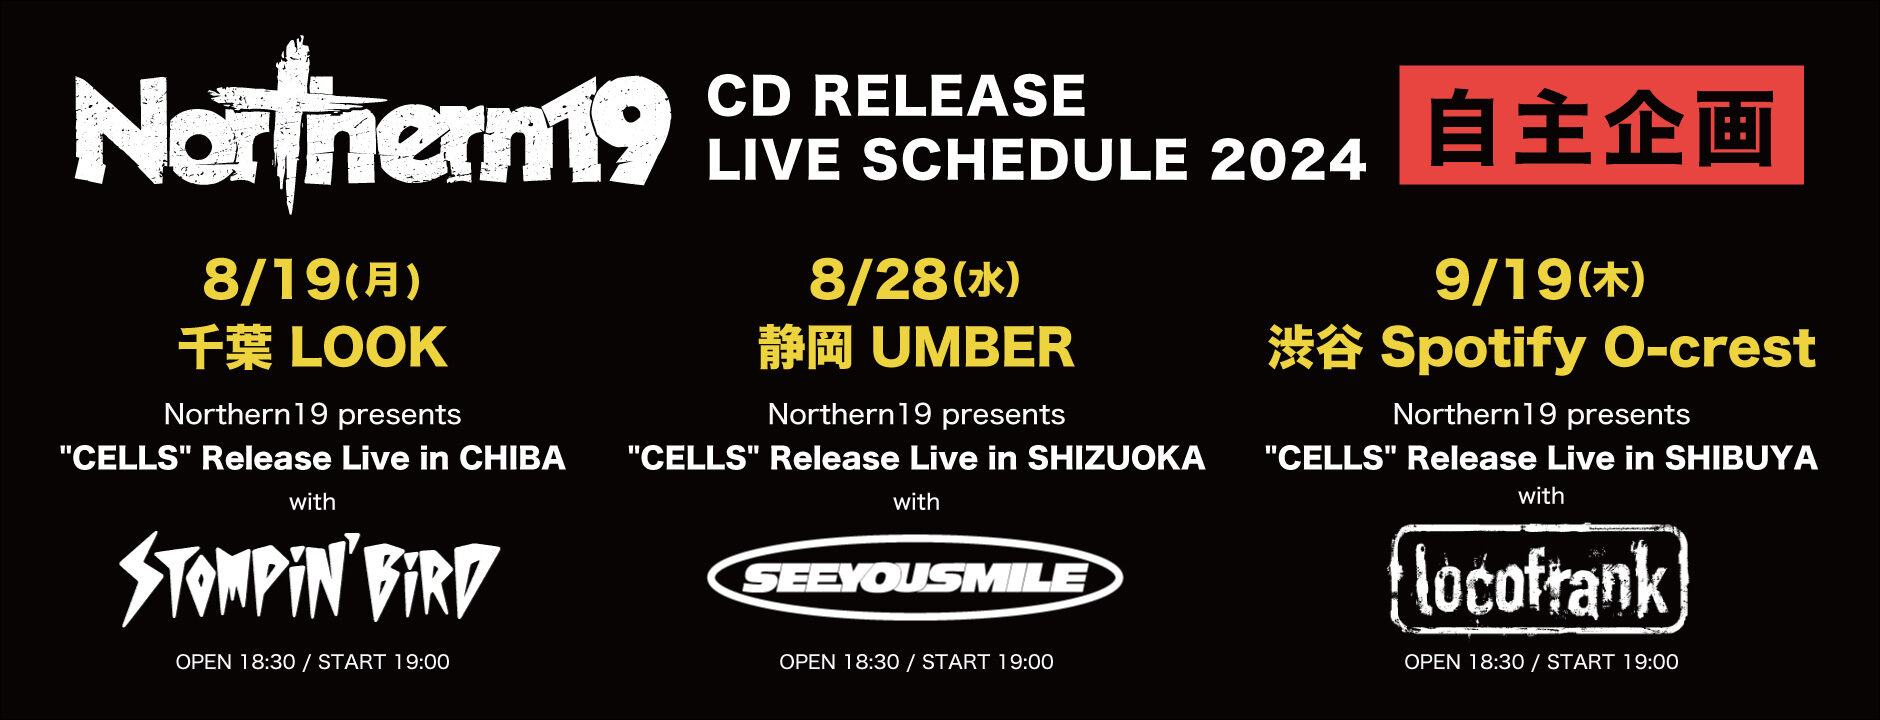 Northern19会場限定CD "CELLS" Release Live 自主企画